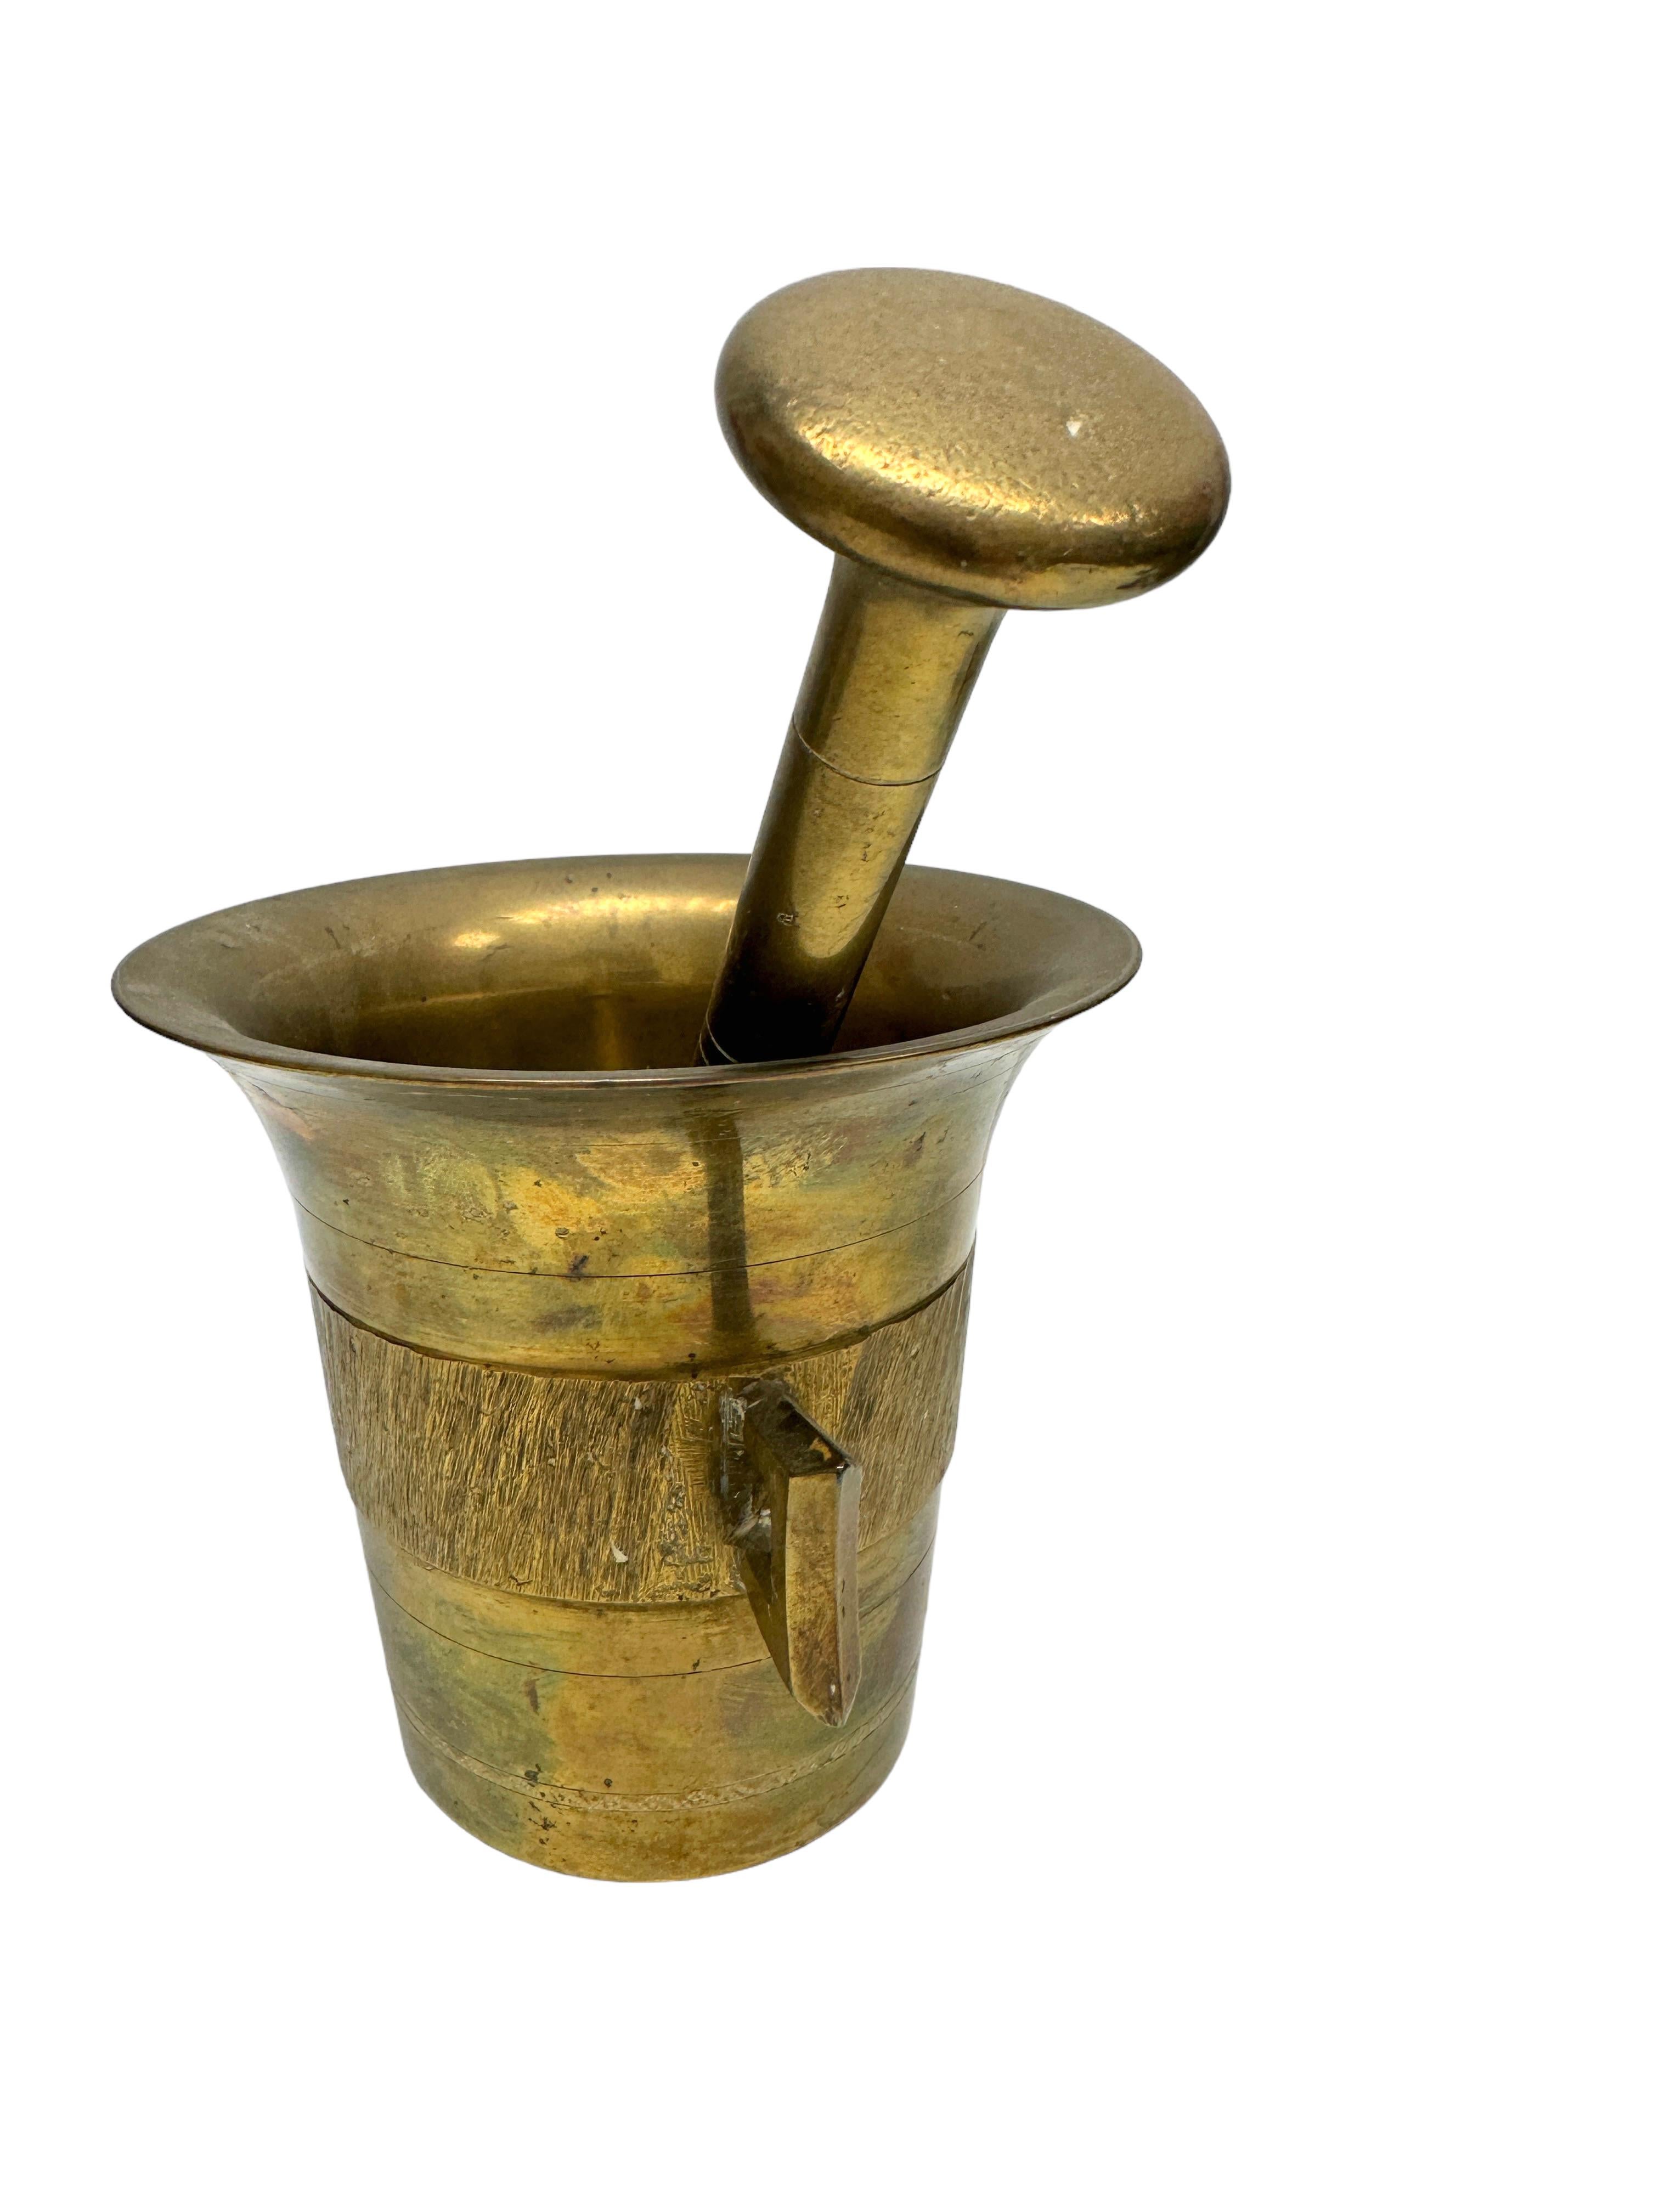 Austrian Bronze Mortar and Pestle, Original Patina, Pharmacy or Herbalist In Good Condition For Sale In Nuernberg, DE